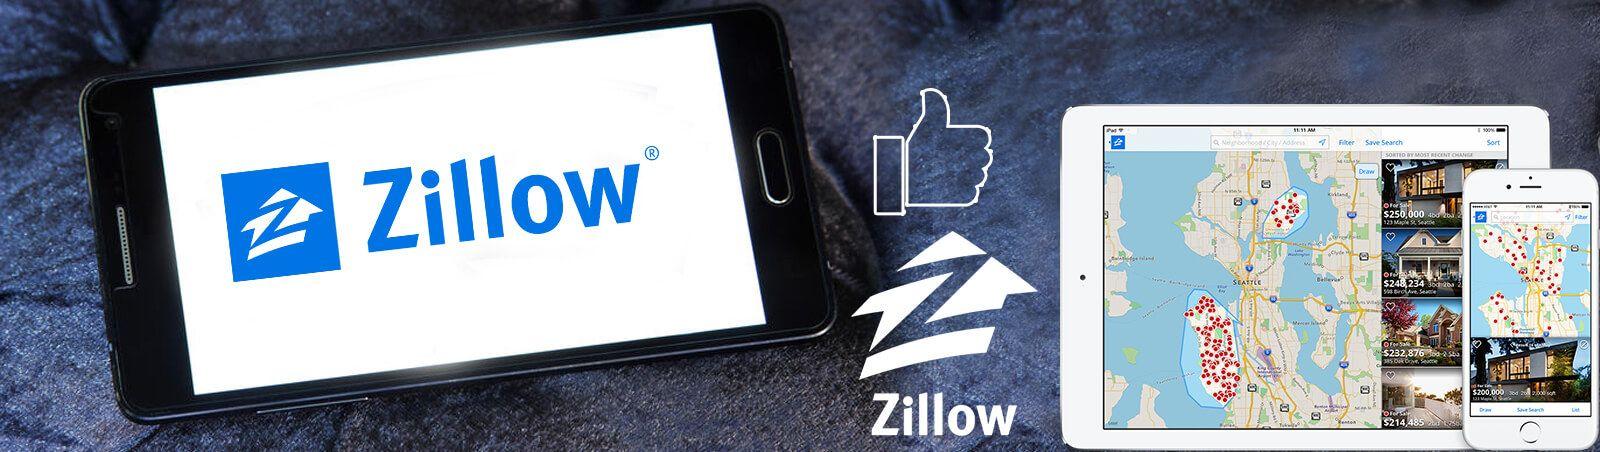 Zillow iPhone Logo - How to Develop a Real Estate App like Zillow? -